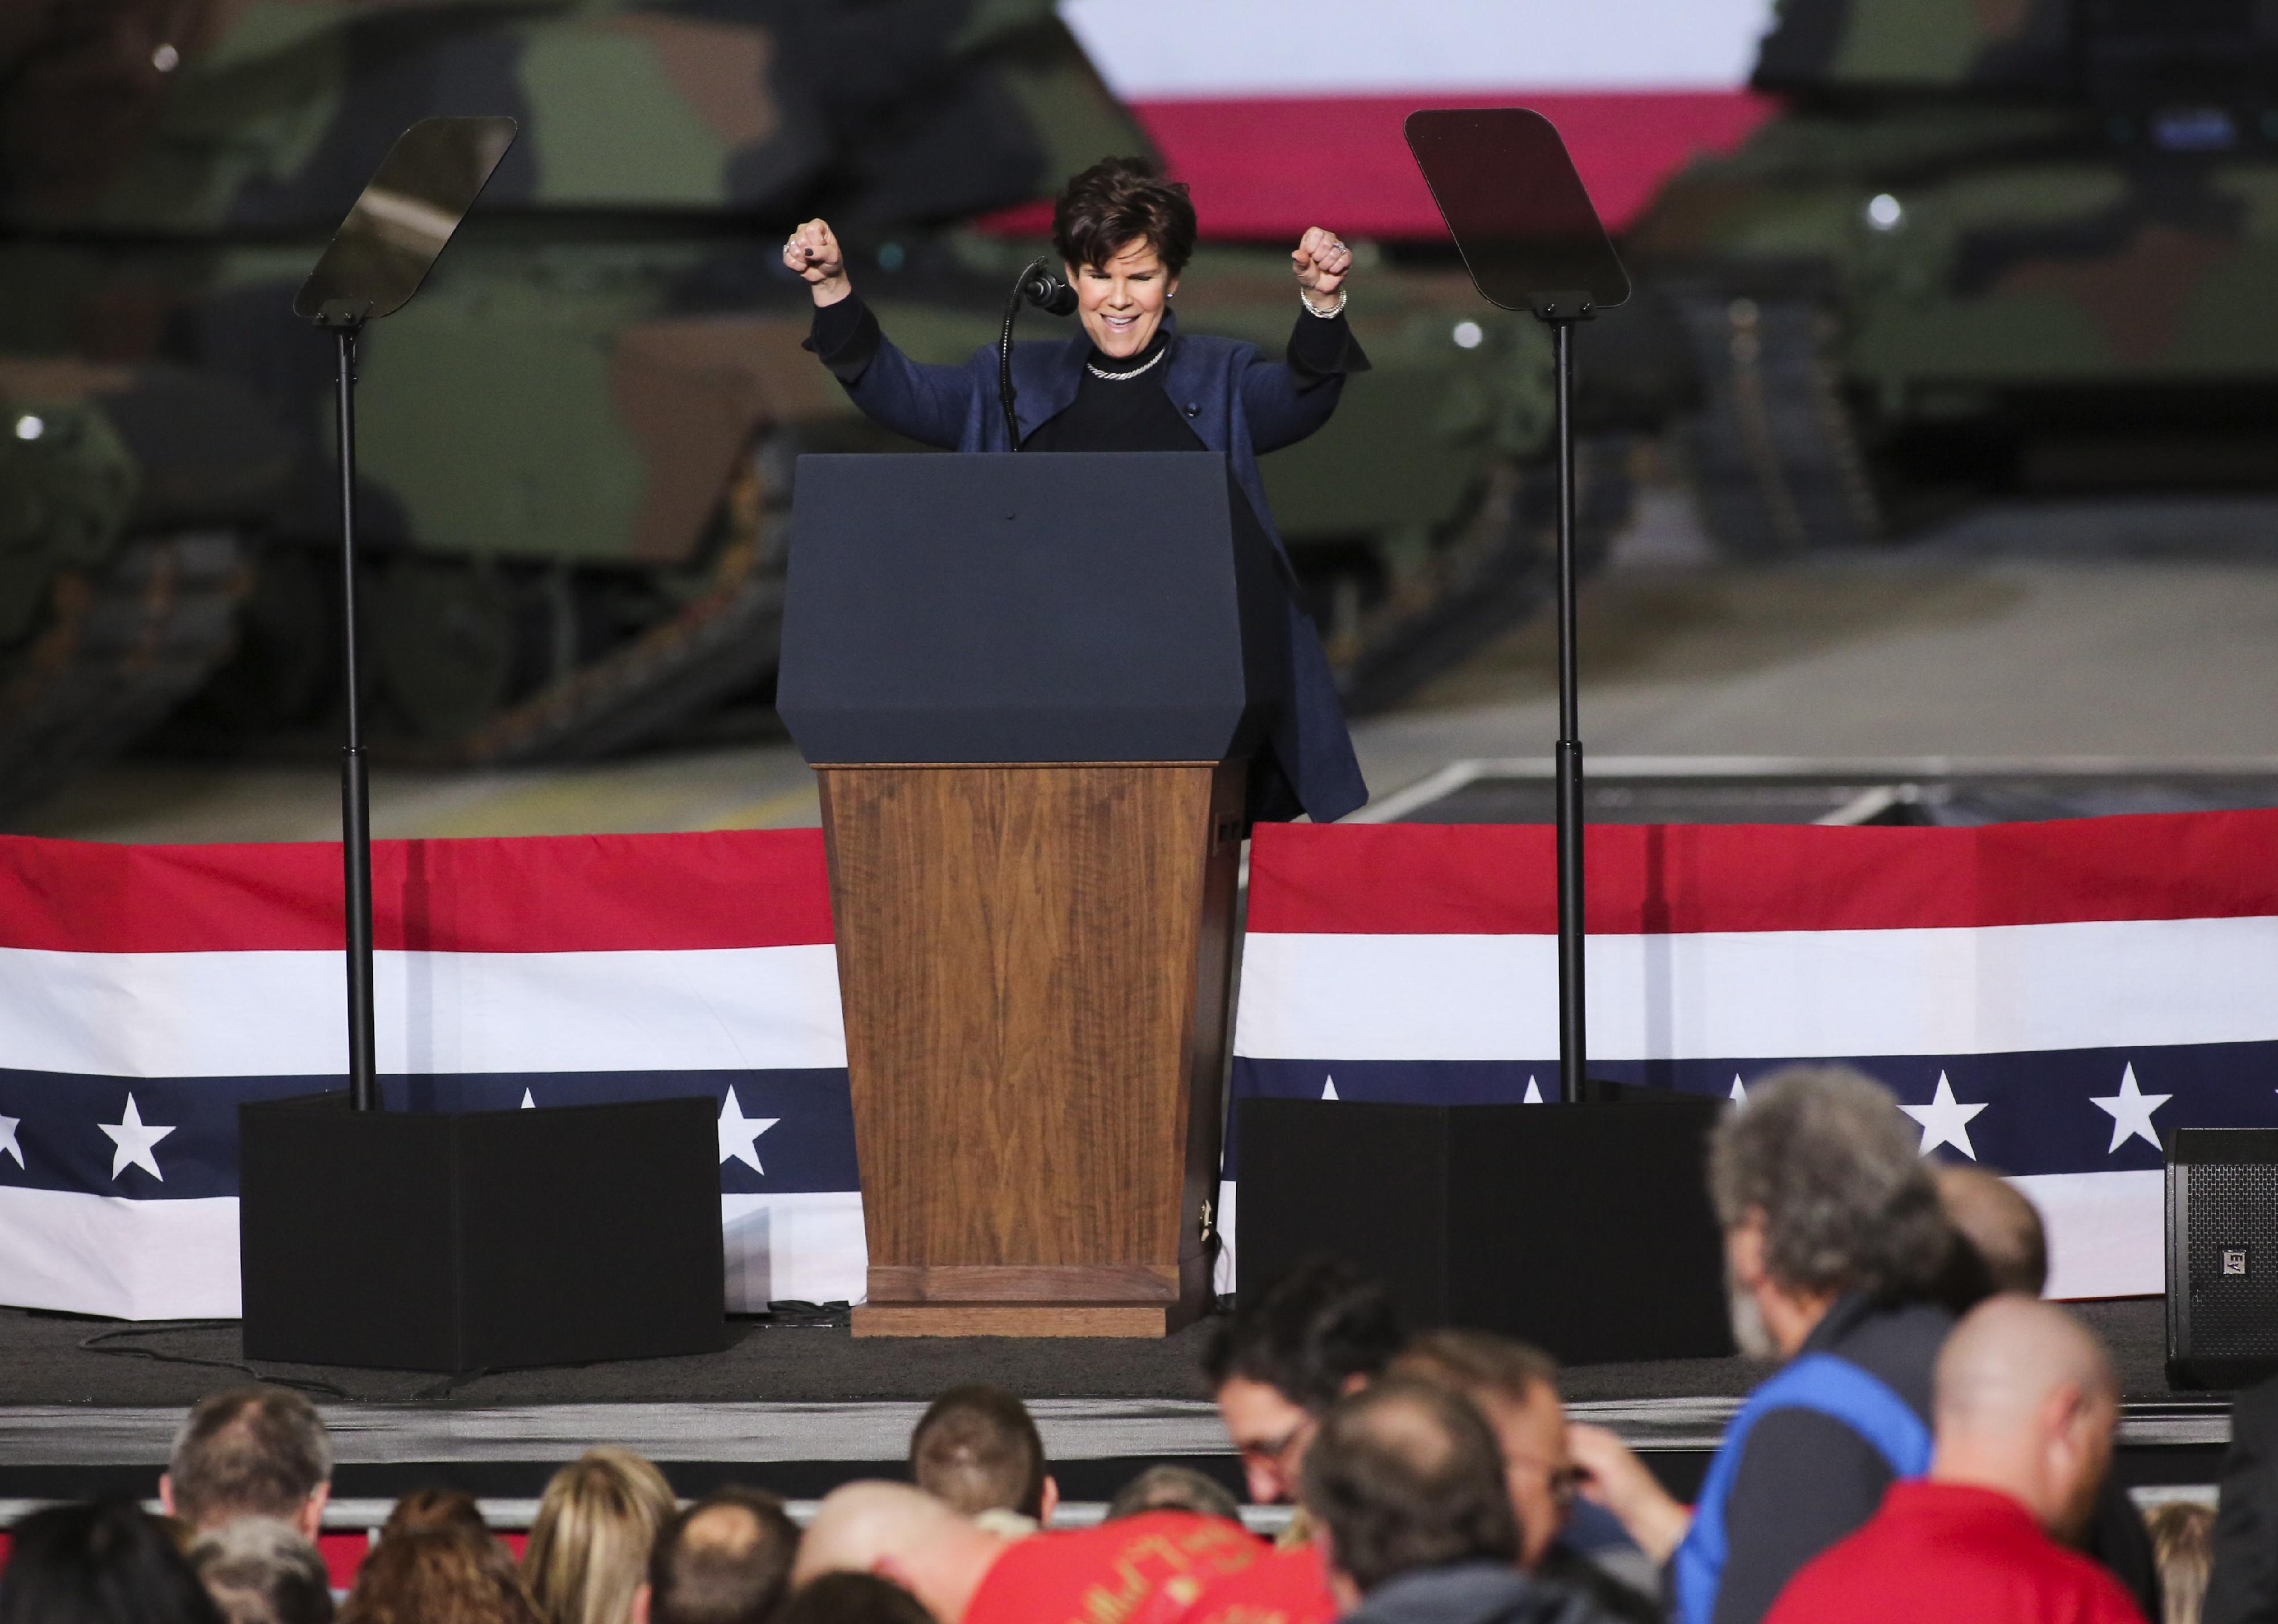 Phebe Novakovic speaks and cheers on a stage decorated with stars and stripes.